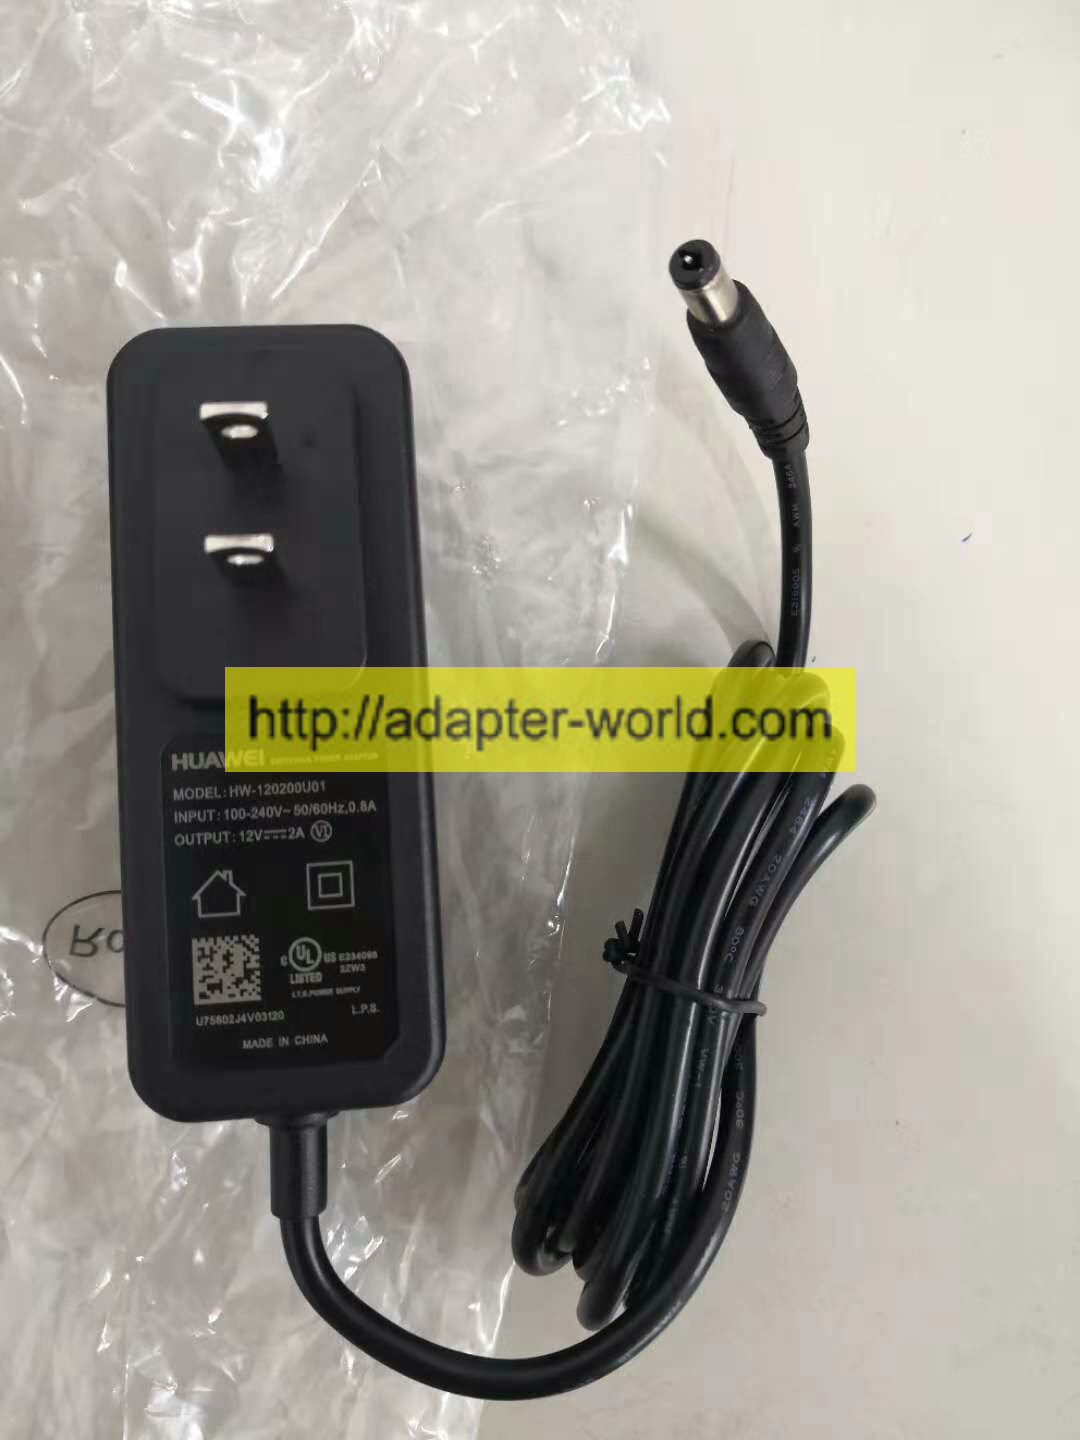 *100% Brand NEW* HUAWEI HW-120200U01 12V--2A Switching Power Adapter Free shipping!